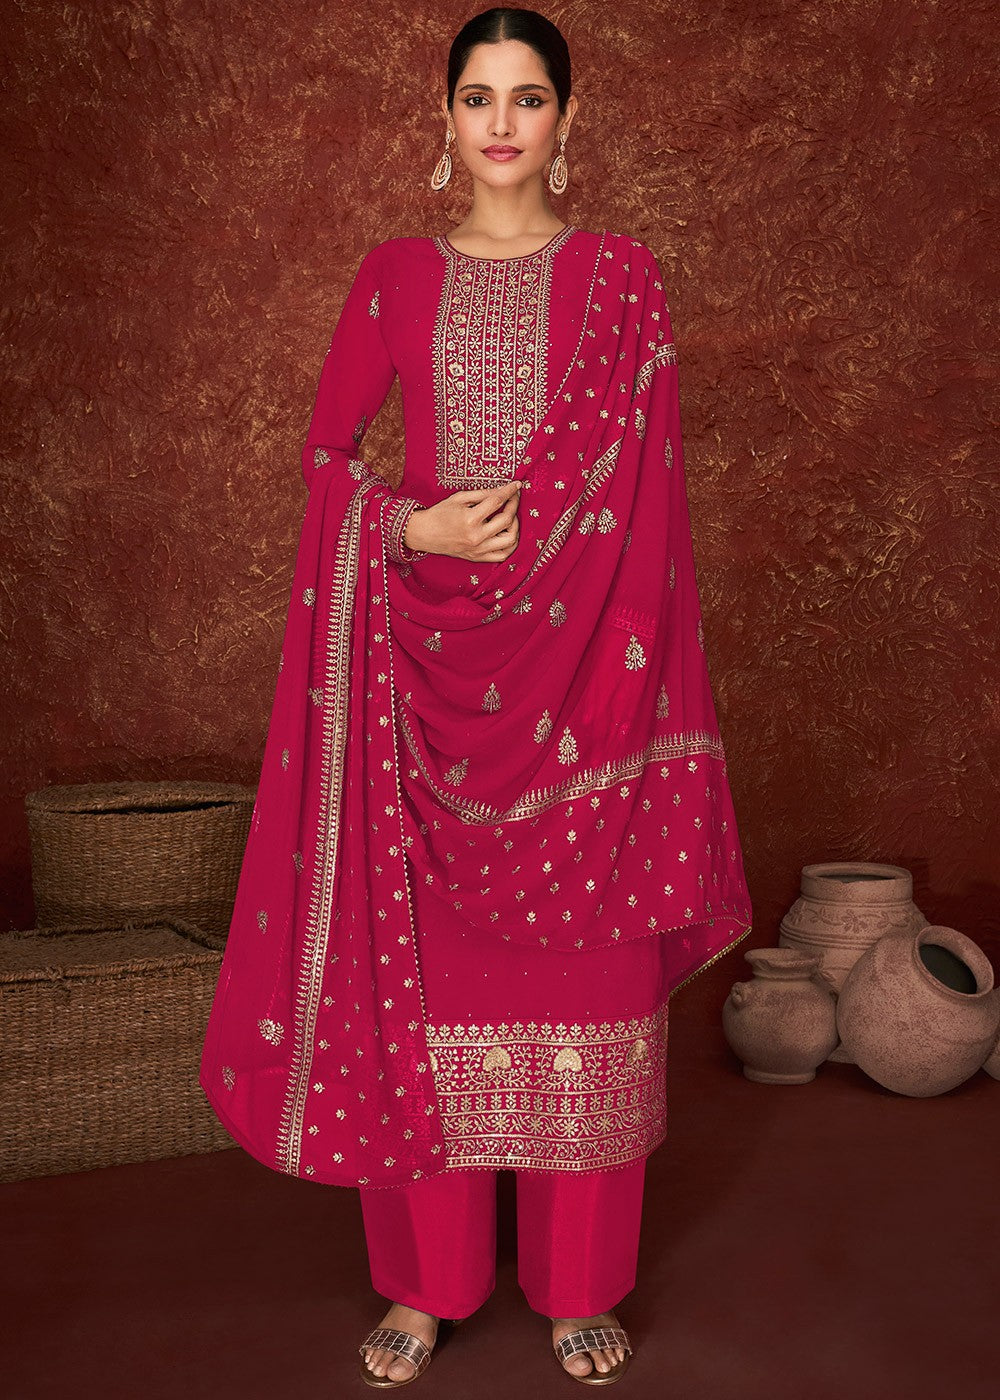 Buy Pink & Gold Splendid Embroidered Suit - Pakistani Style Suit